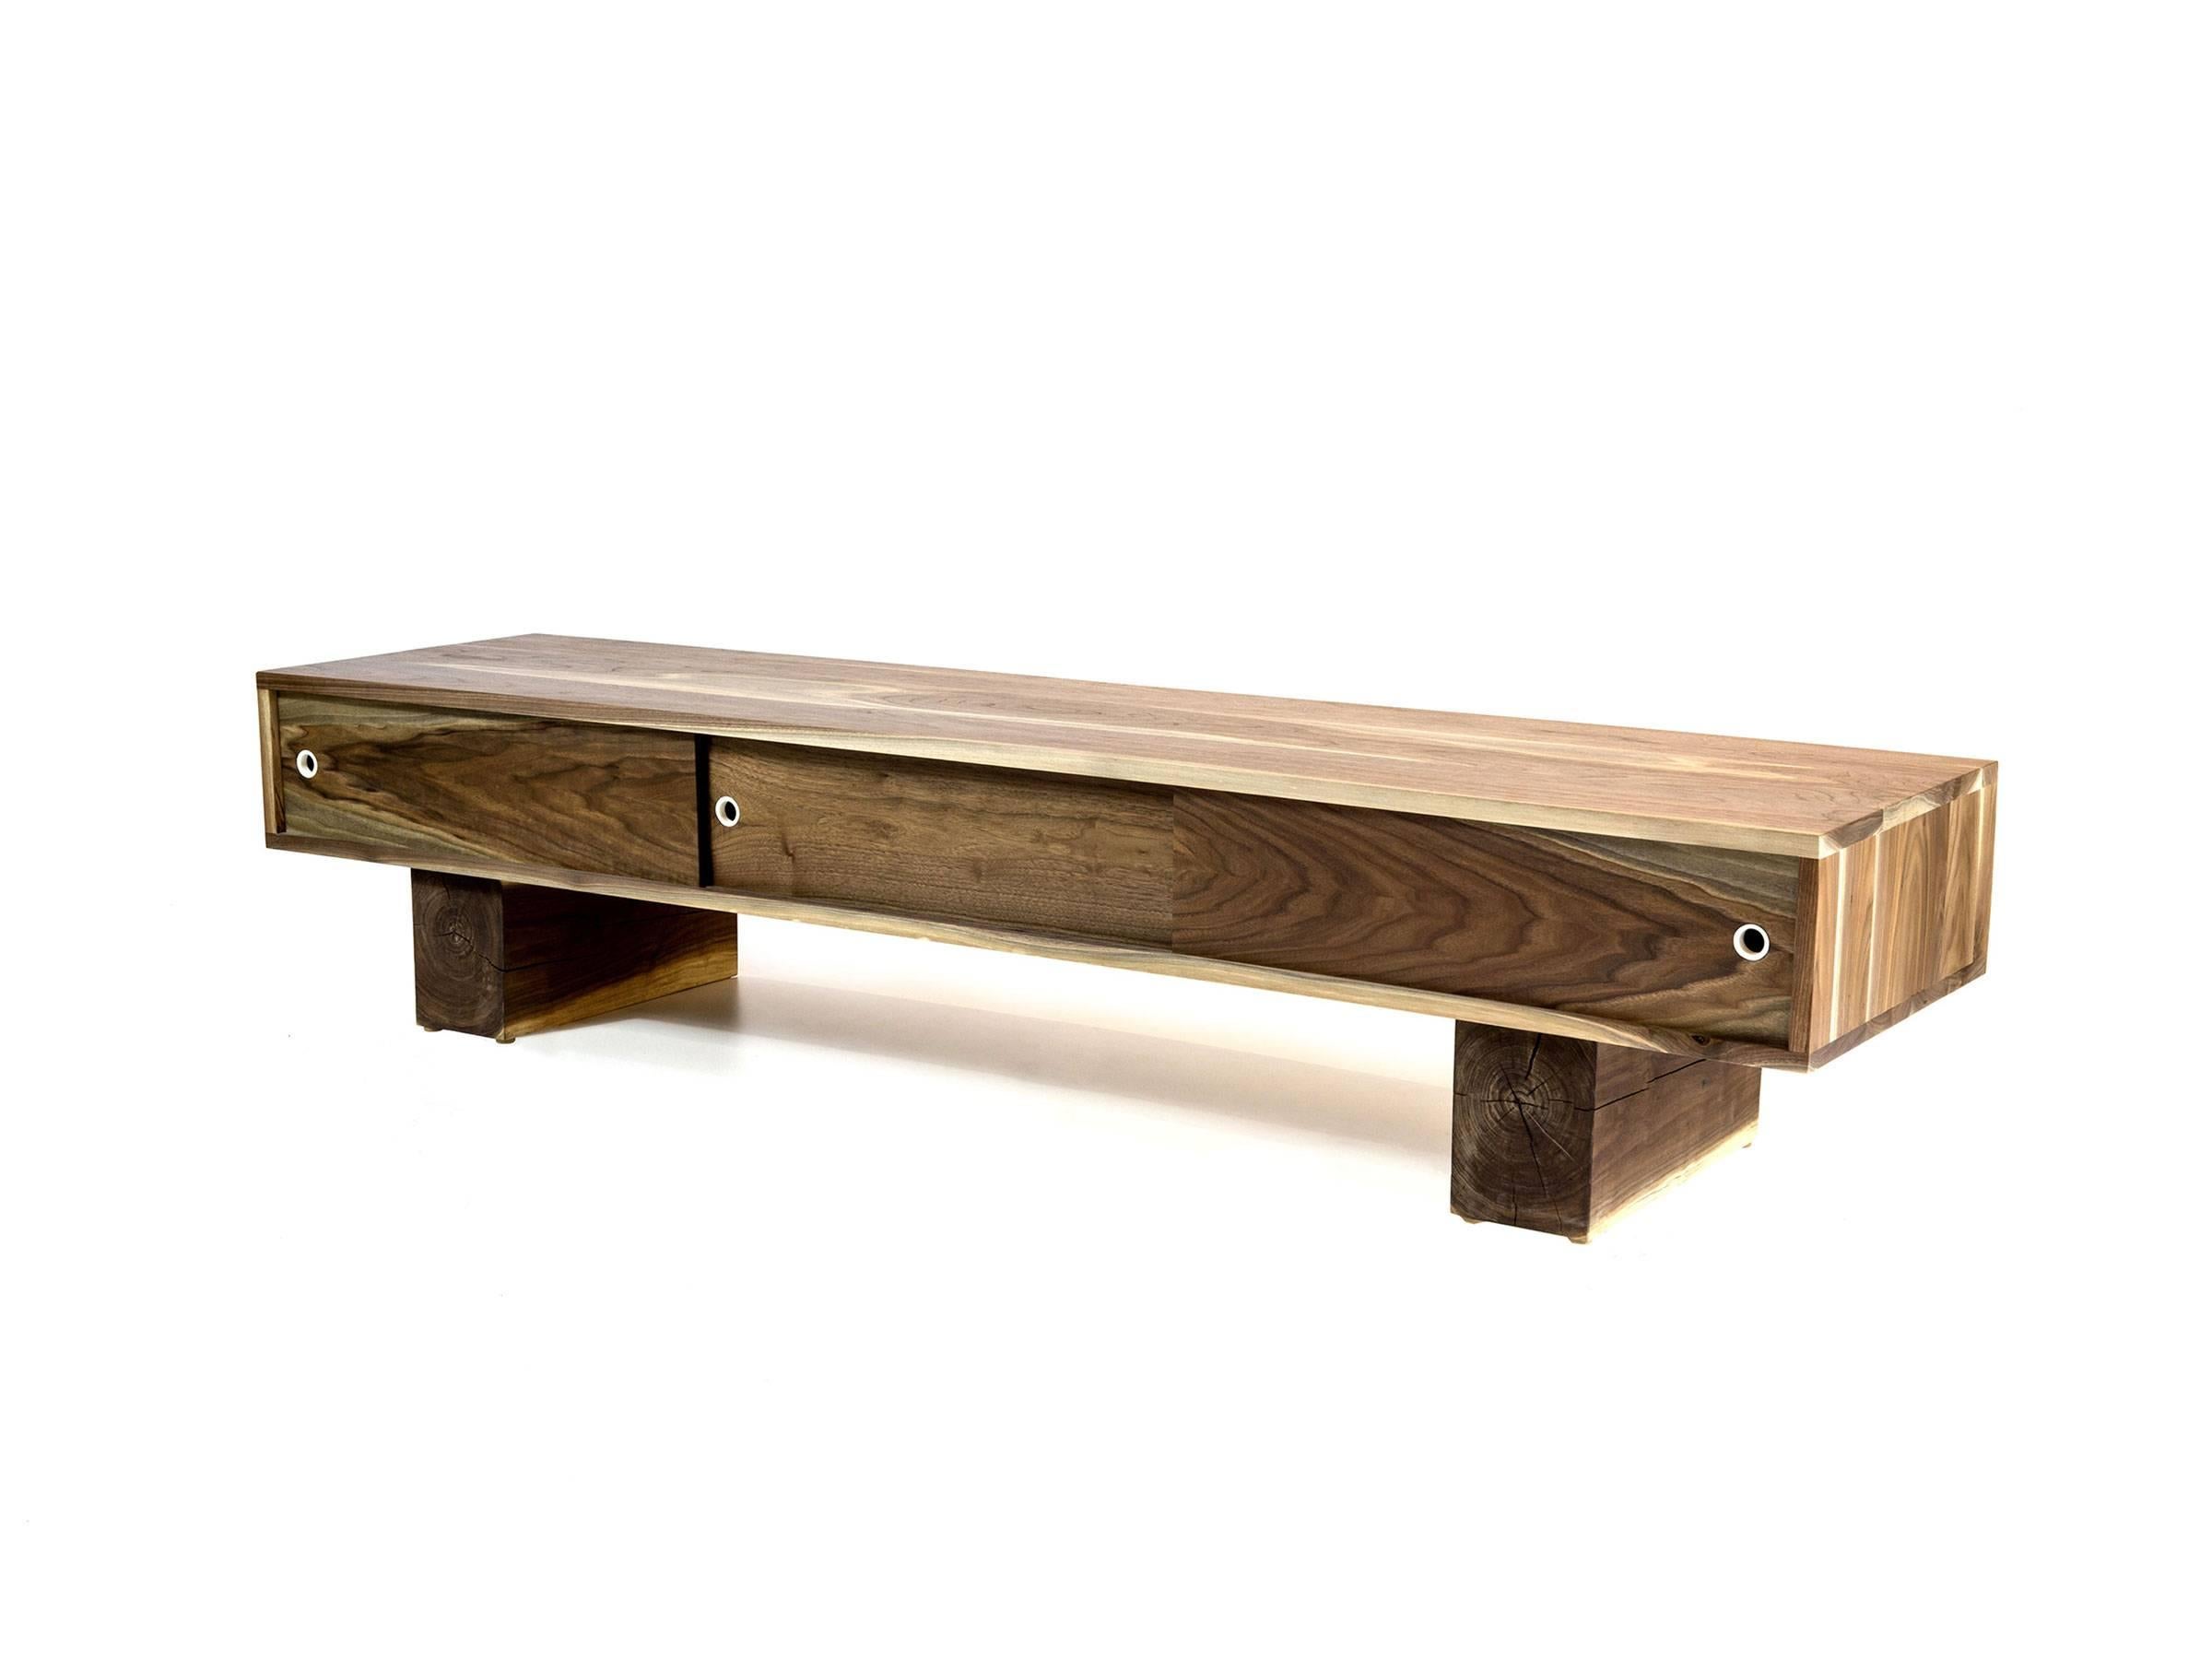 Low flung media console with three sliding doors. Sitting on scaled down beam legs, the Pawnee is perfect for media devices such as TVs, turntables, speakers, etc. This console helps to hide the clutter that comes with these electronic